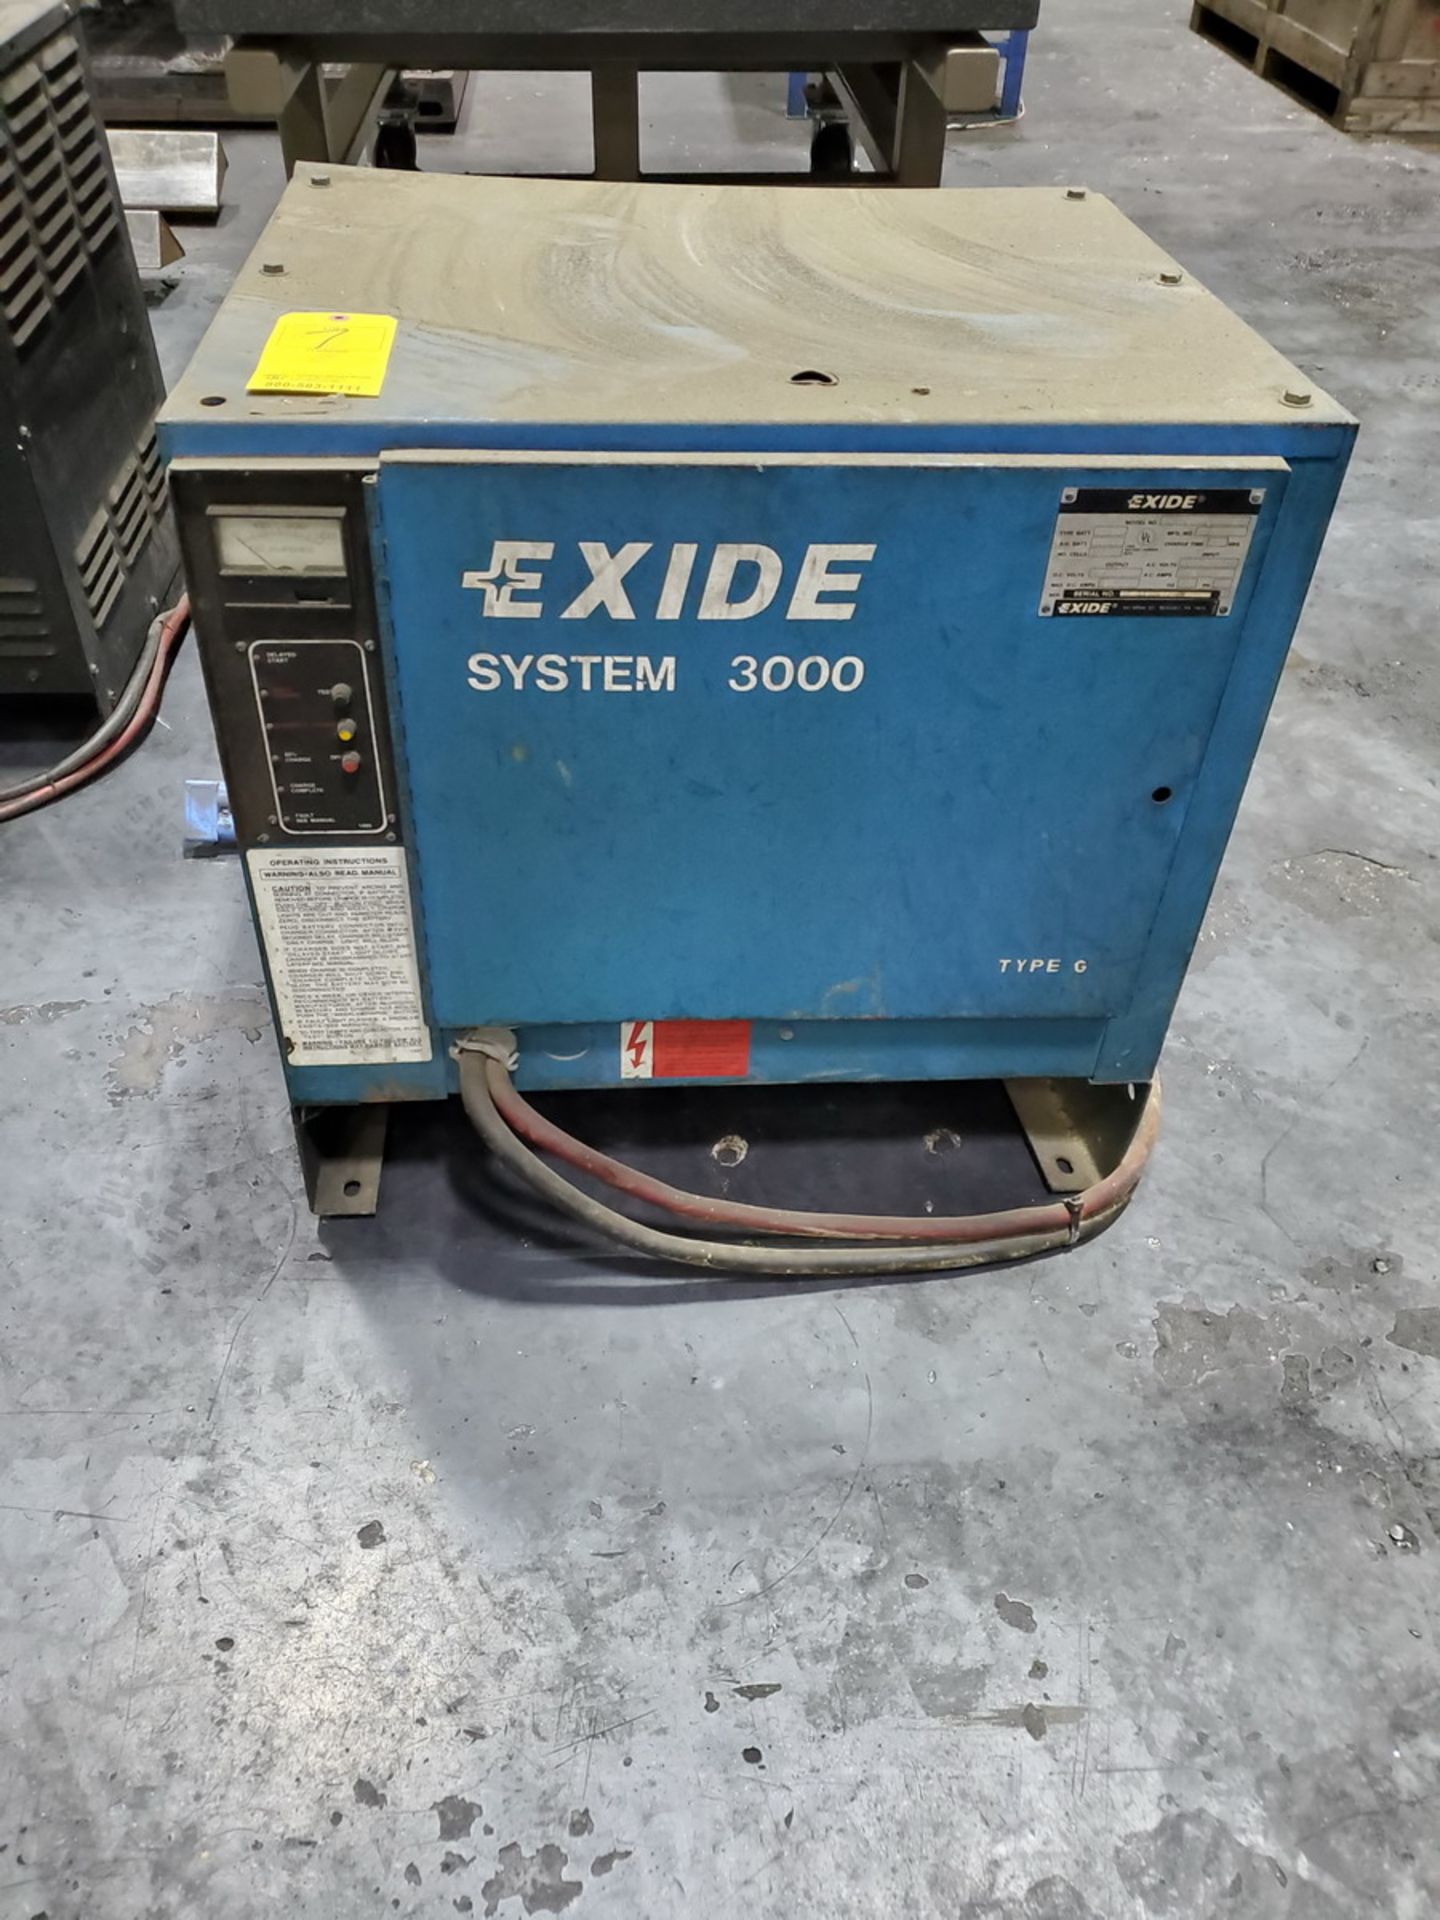 Exide Industrial Battery Charger 8hr Charge Time, 208/240/480V, 3PH, 60HZ